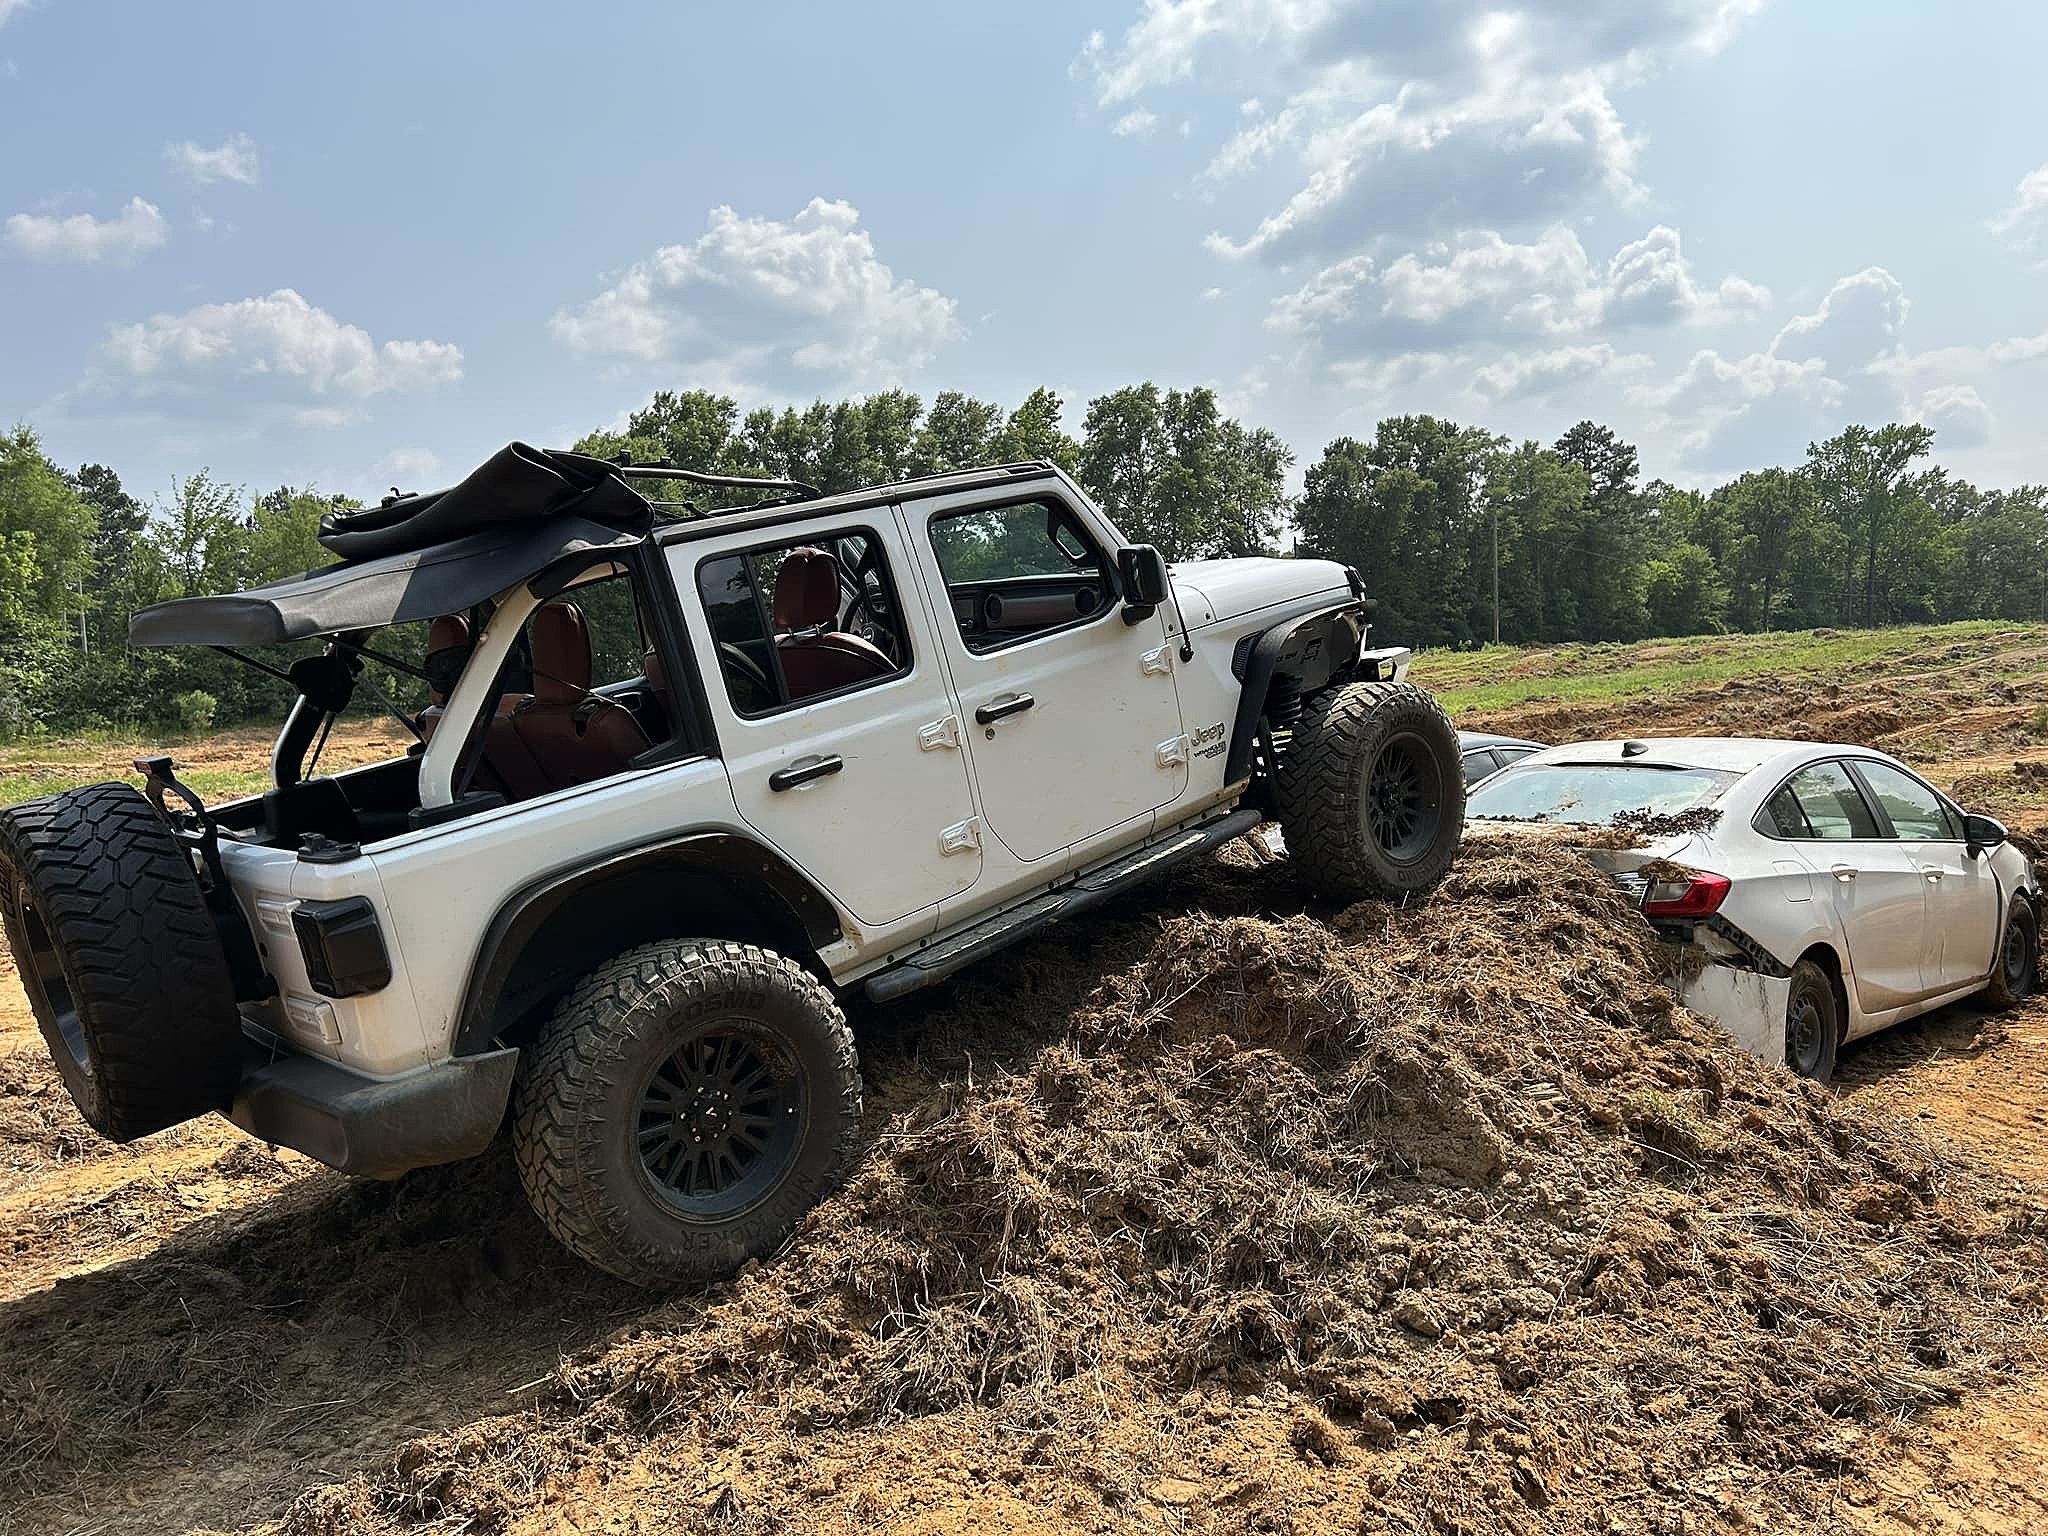 Tuscaloosa Mud Park Open Now, Offering Weekend Off-Roading Spot